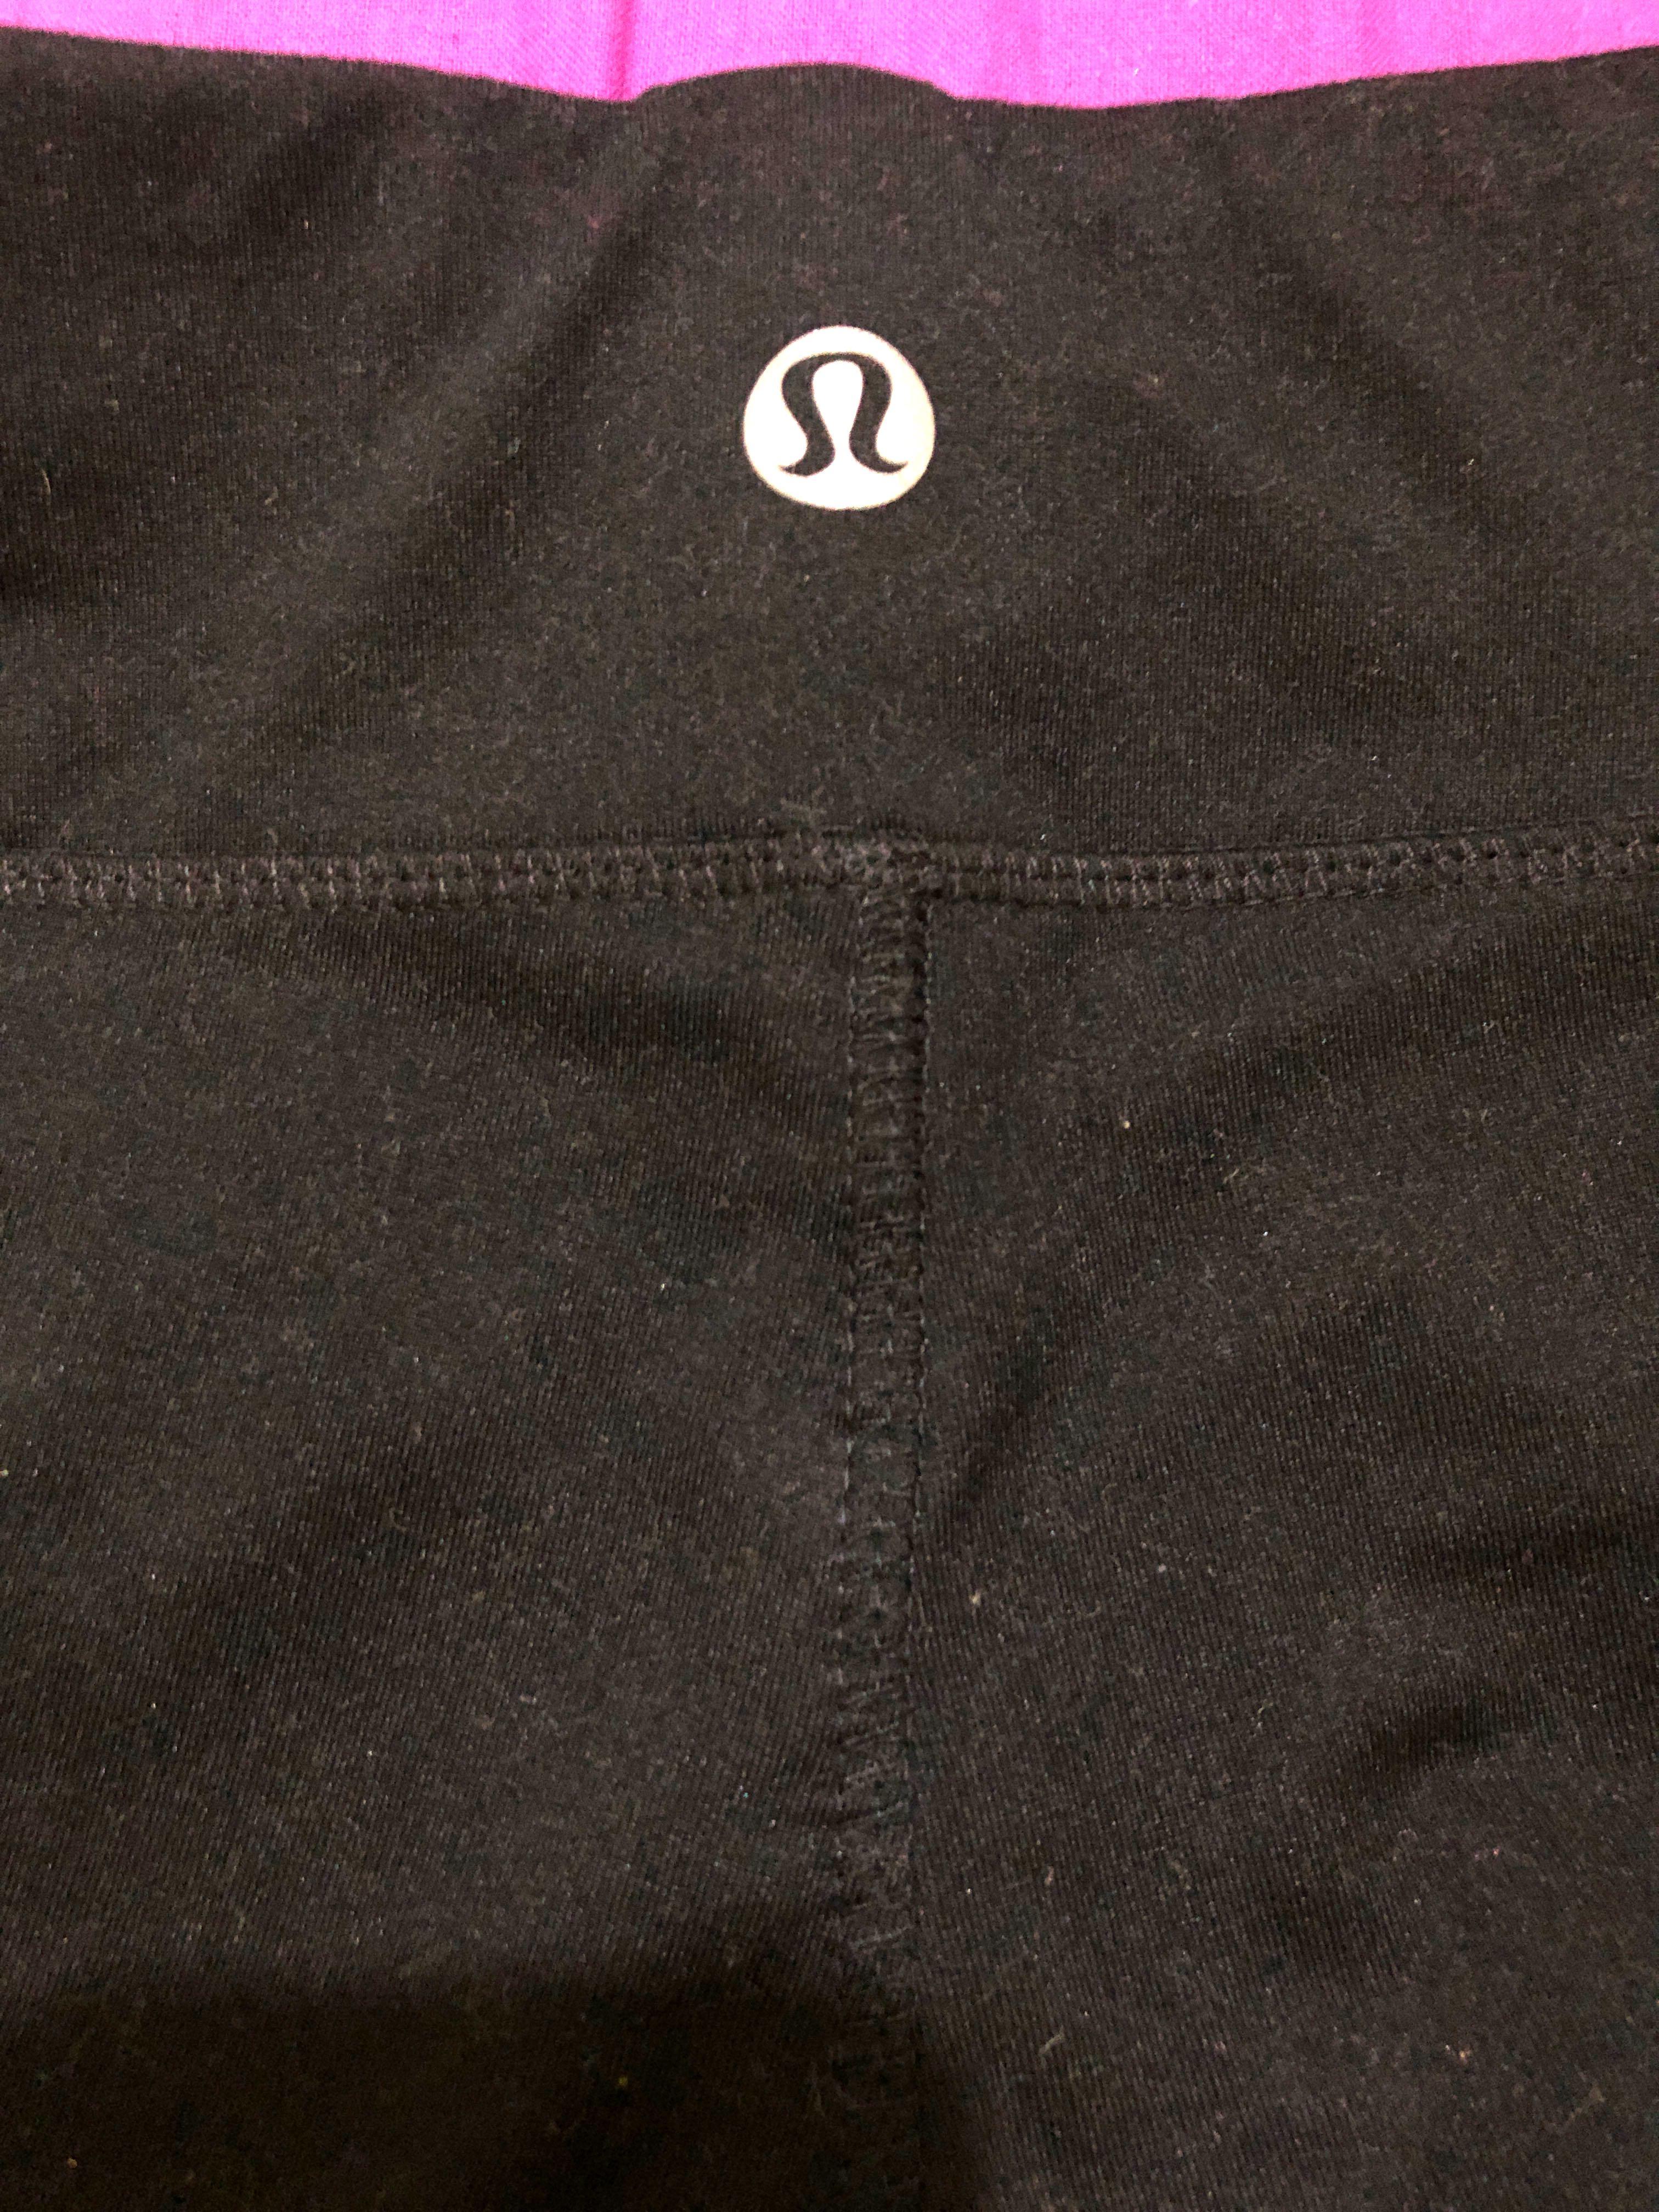 anyone remember the printed waistbands wondering when those will come back  in the trend cycle  rlululemon